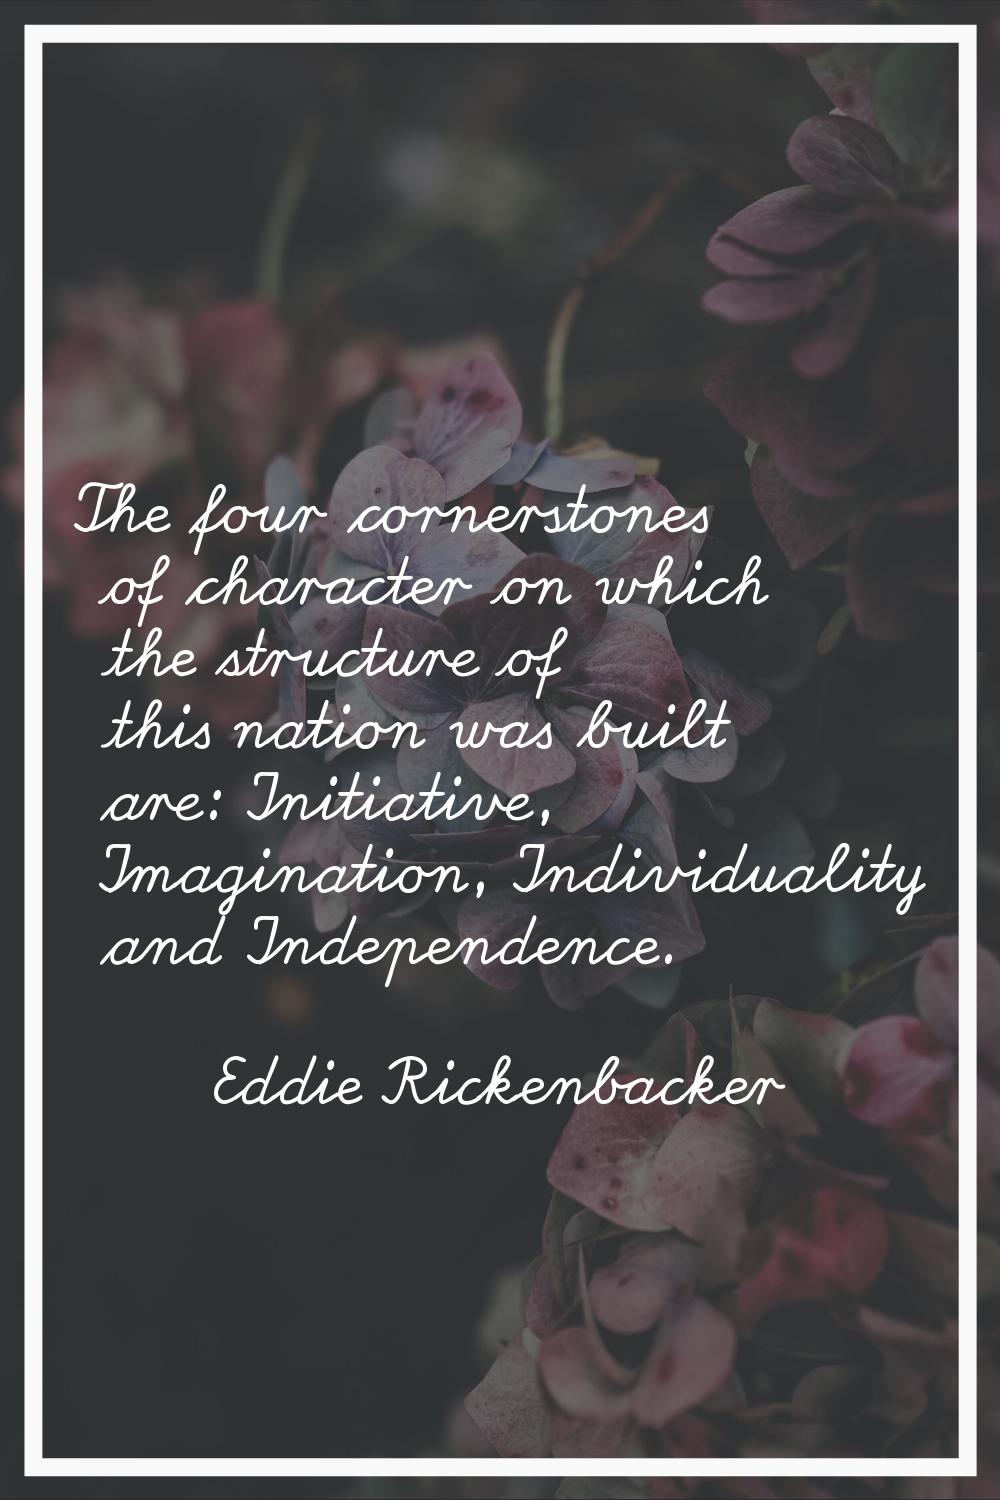 The four cornerstones of character on which the structure of this nation was built are: Initiative,